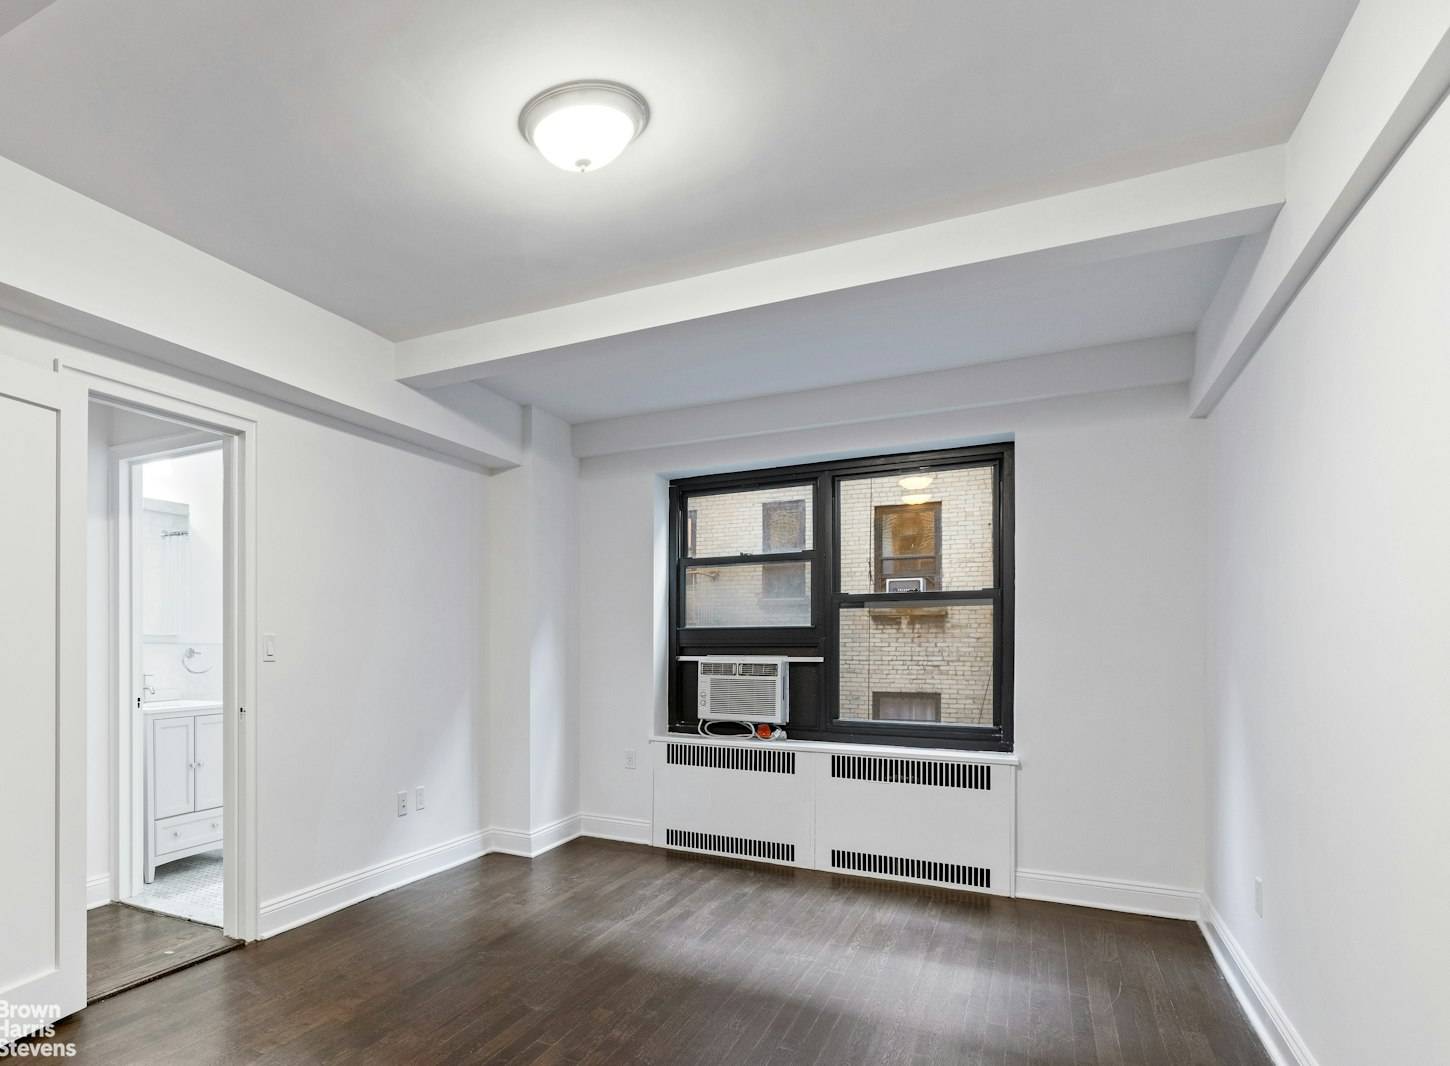 Delight in the charm of Carnegie Hill living with this splendid rental opportunity nestled in the heart of the vibrant neighborhood.